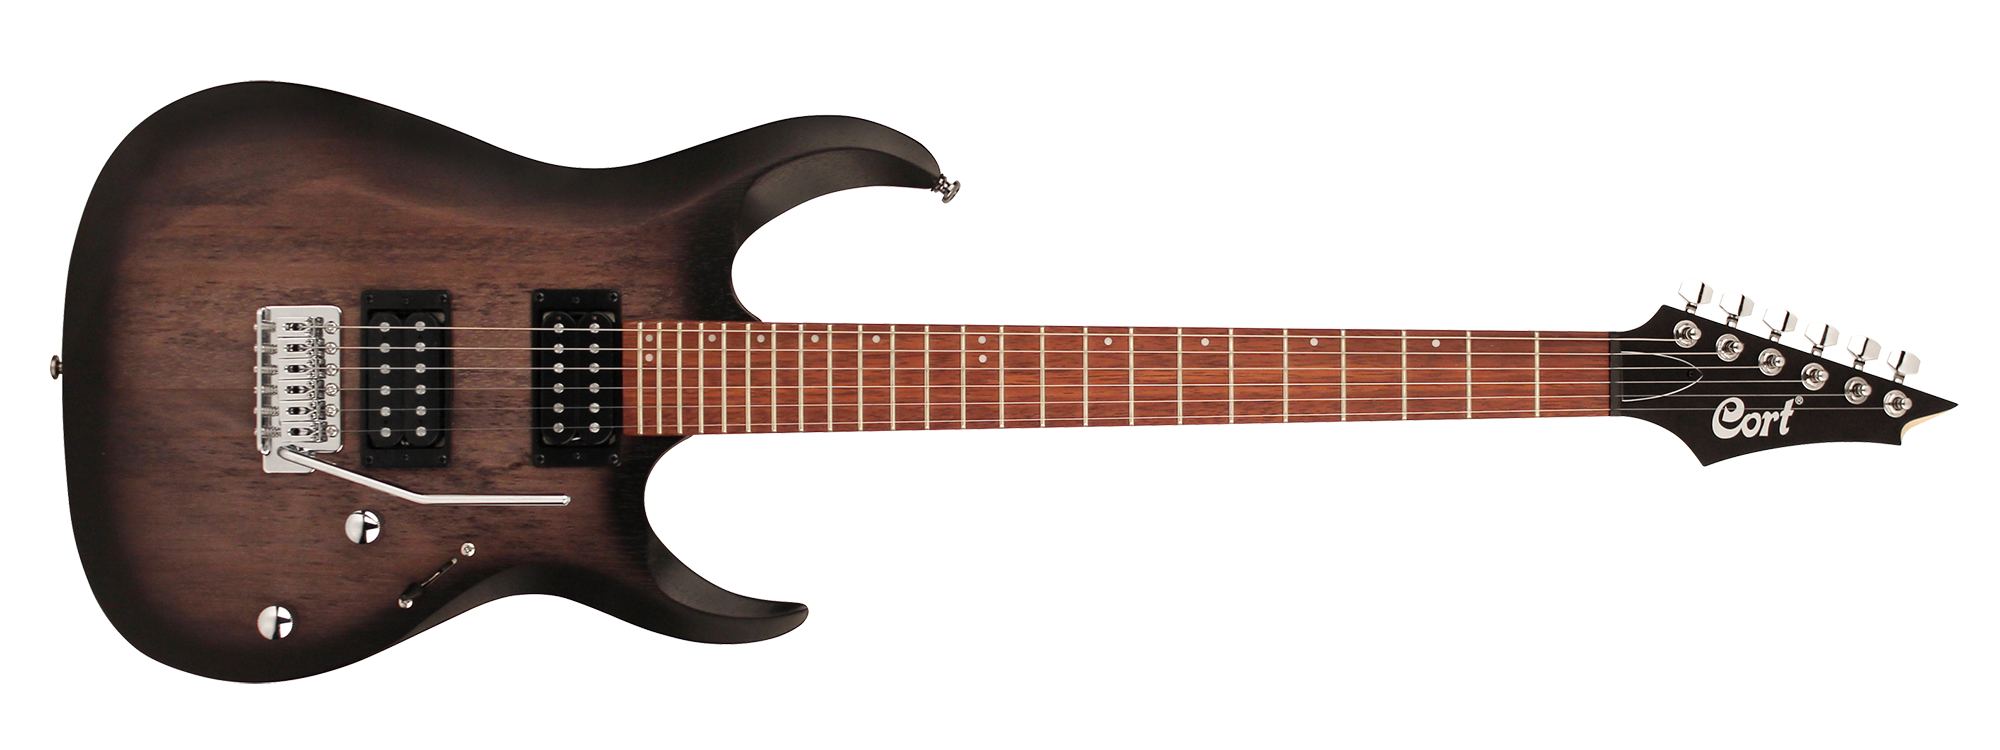 Cort X100, Electric Guitar for sale at Richards Guitars.